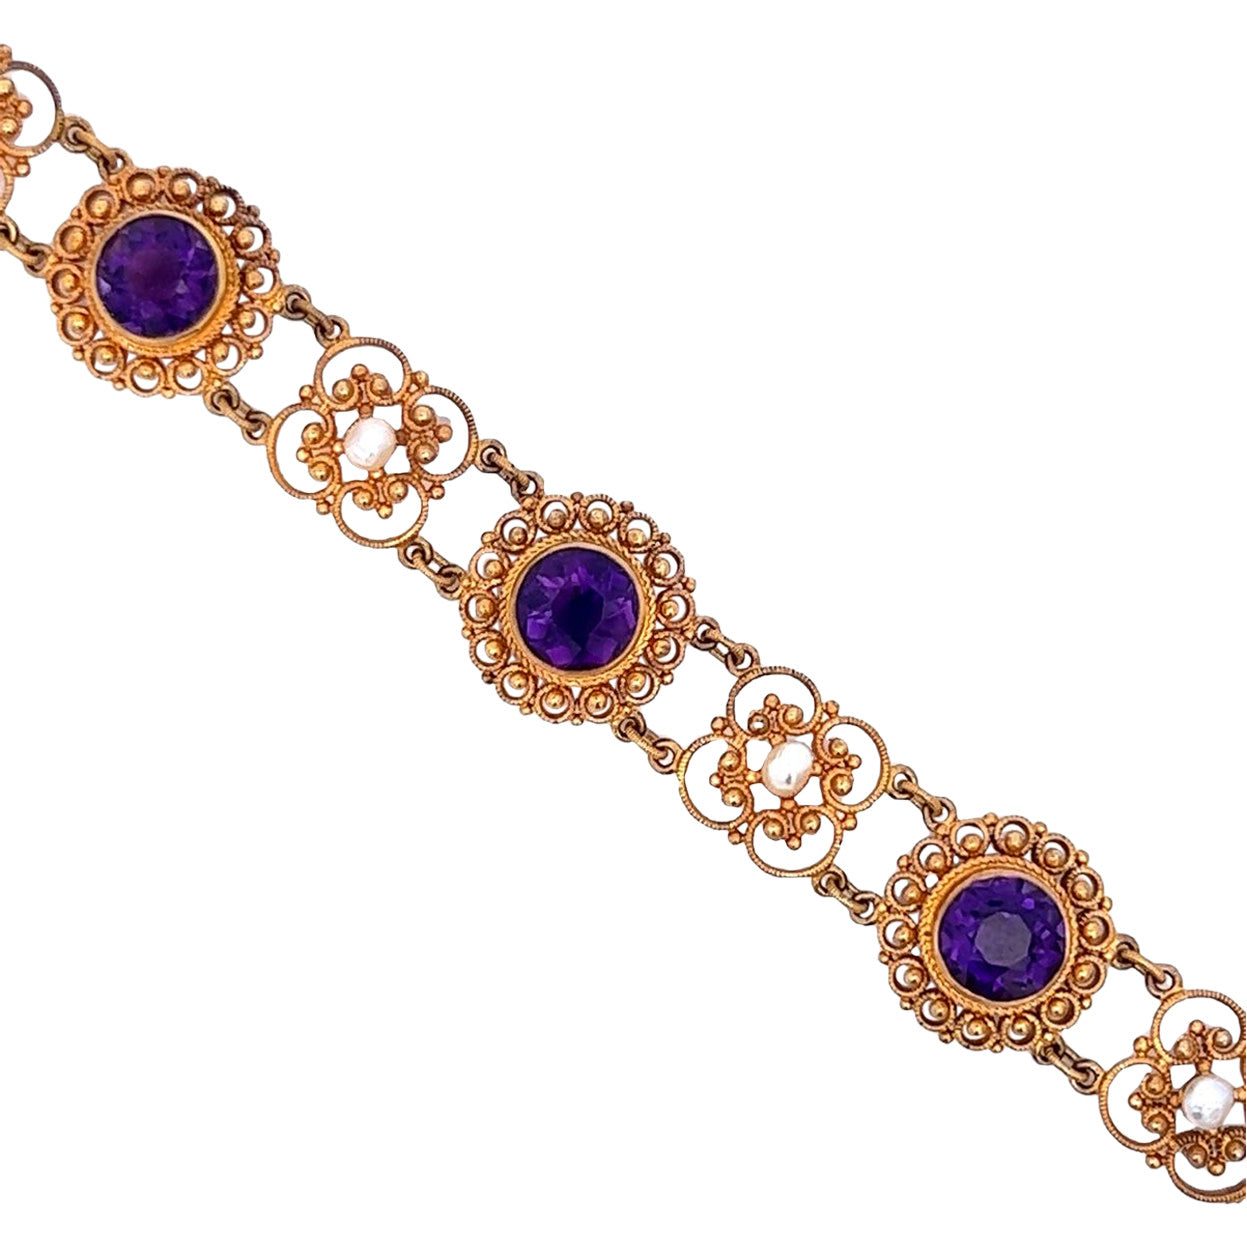 Victorian 14KT Yellow Gold Amethyst & Pearl Bracelet laid flat close-up view